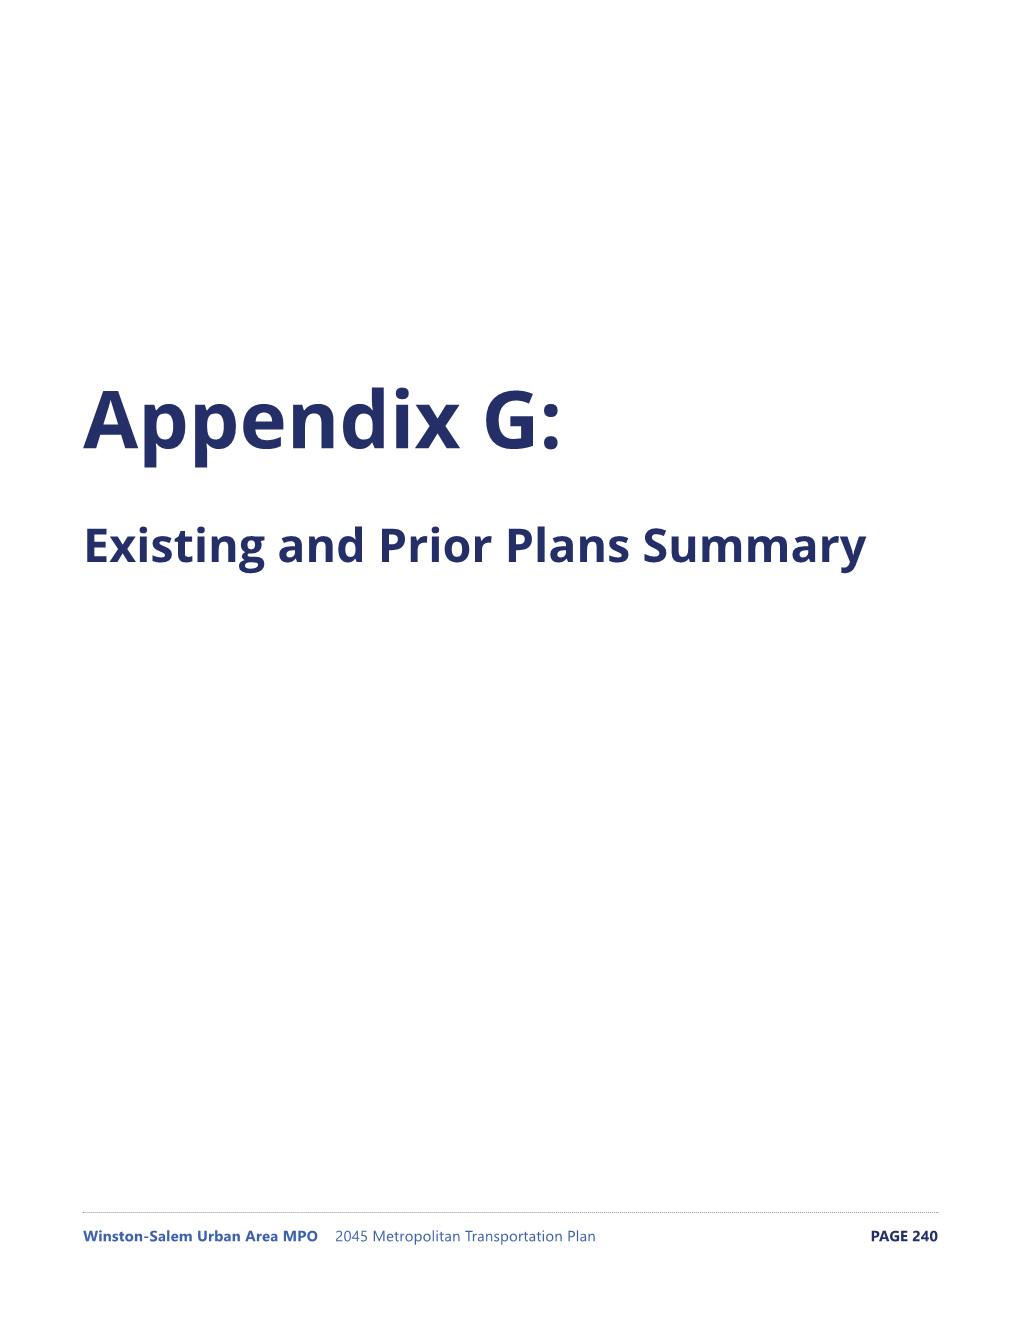 Appendix G: Existing and Prior Plan Summary